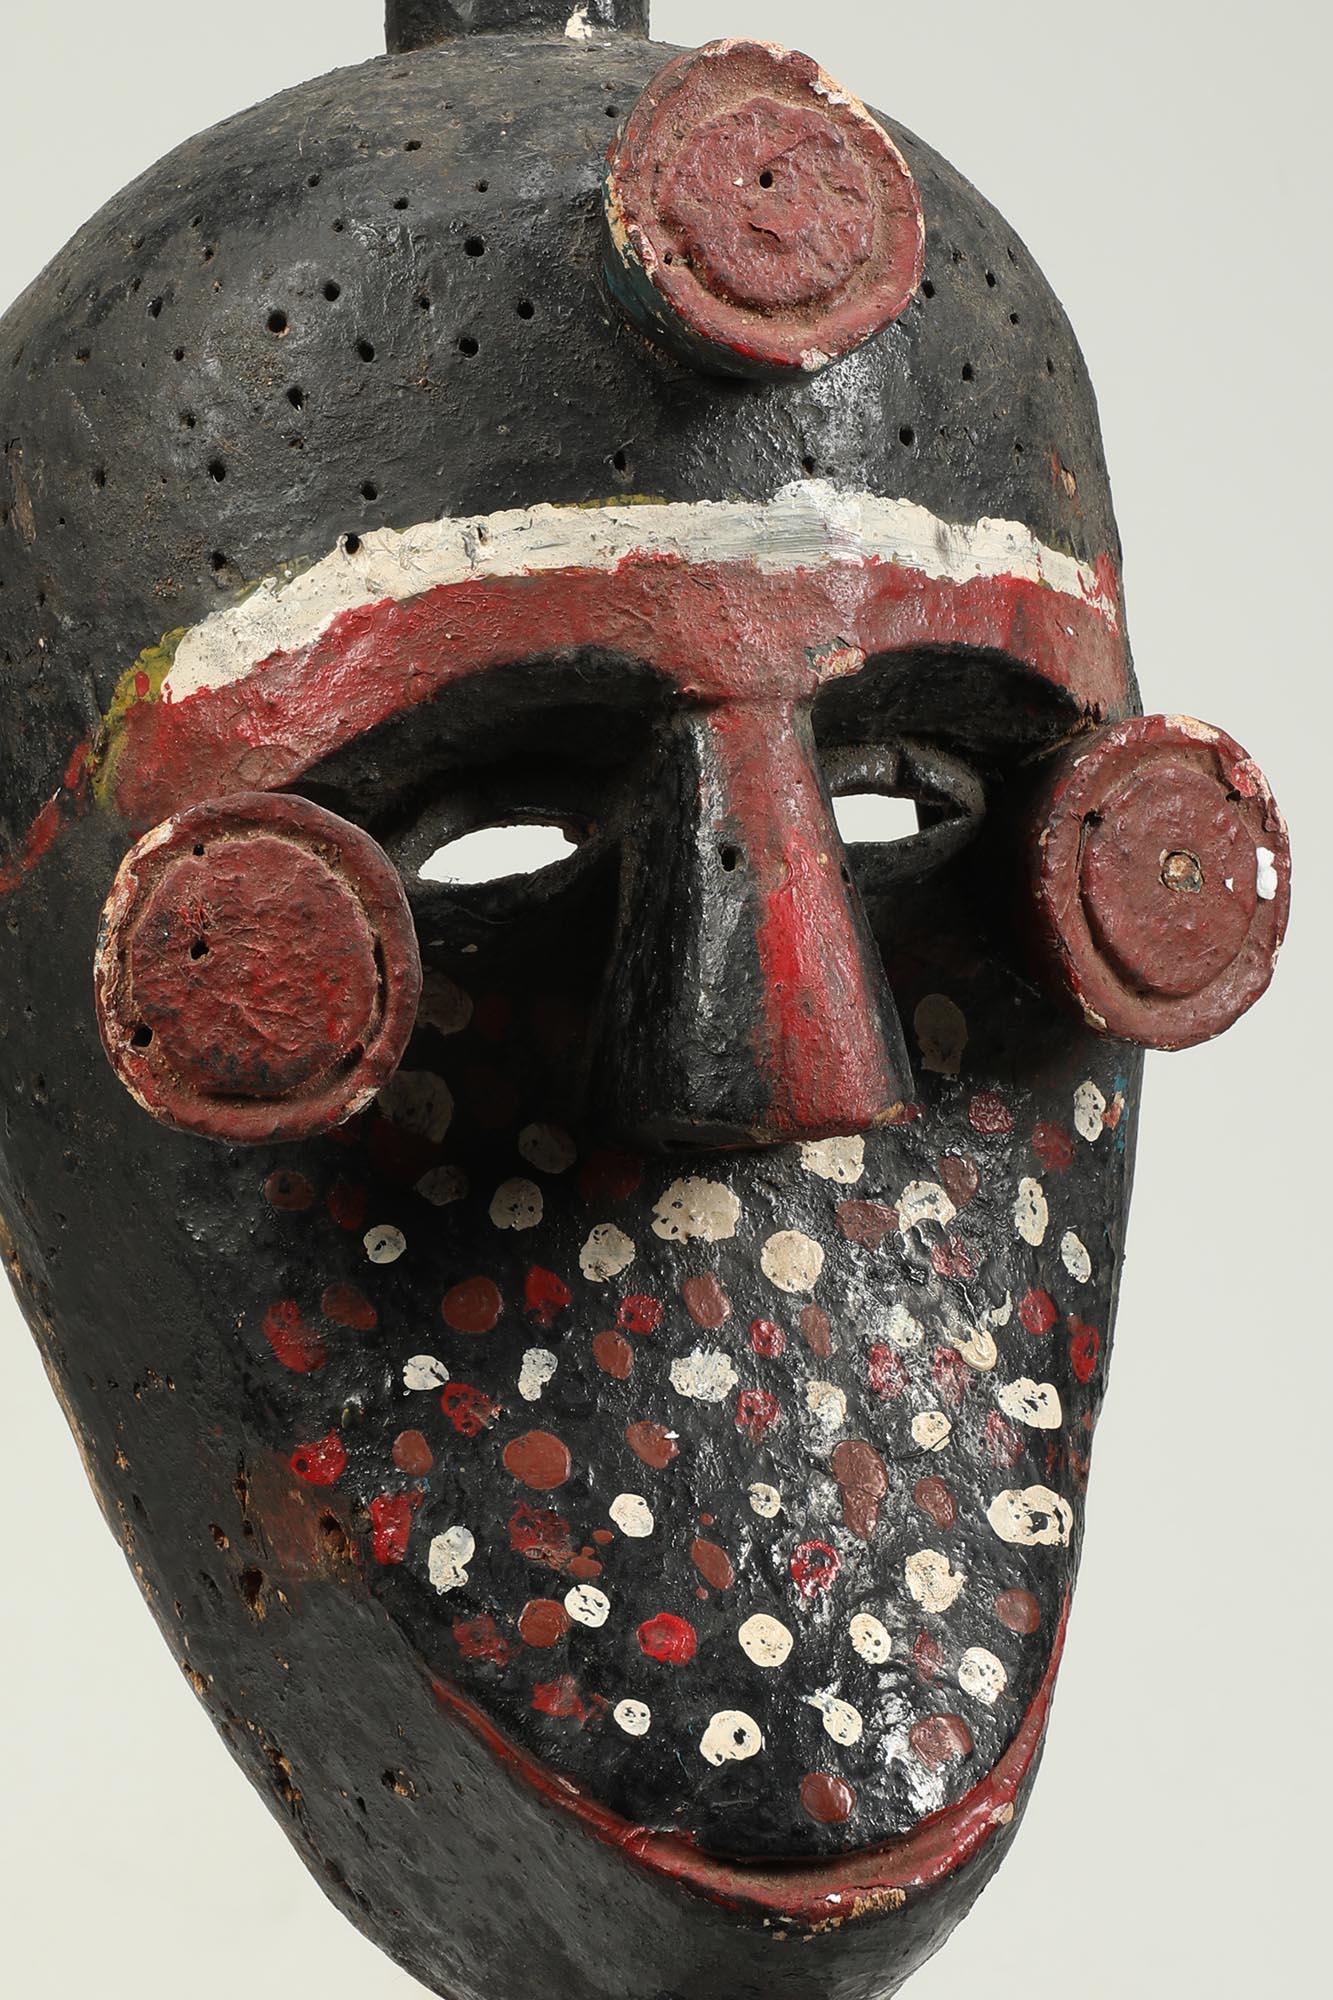 Fine Painted Ibibio Polychrome Mask with Figure on Top, Nigeria Africa. Expressive small figure on top with one hand on top of head, other holding stomach. Circular projections at the corners of the eyes and the center of the forehead. Old painted